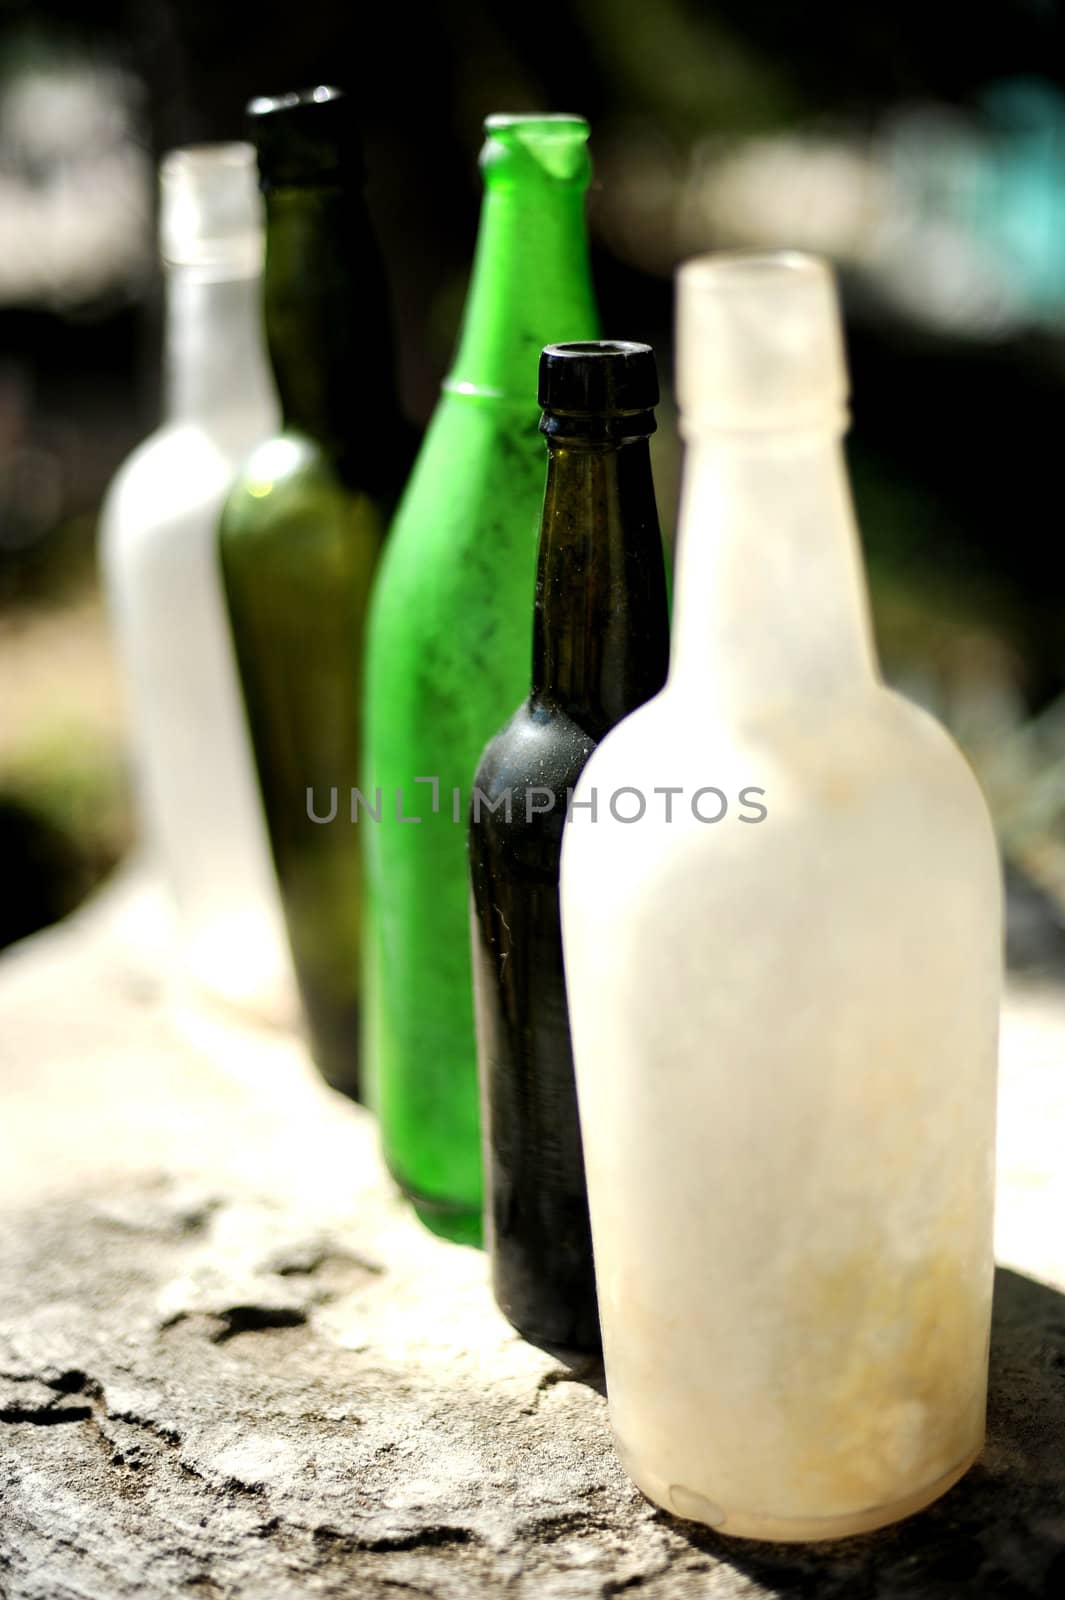 Five vintage beer and rum bottles lined up in a row